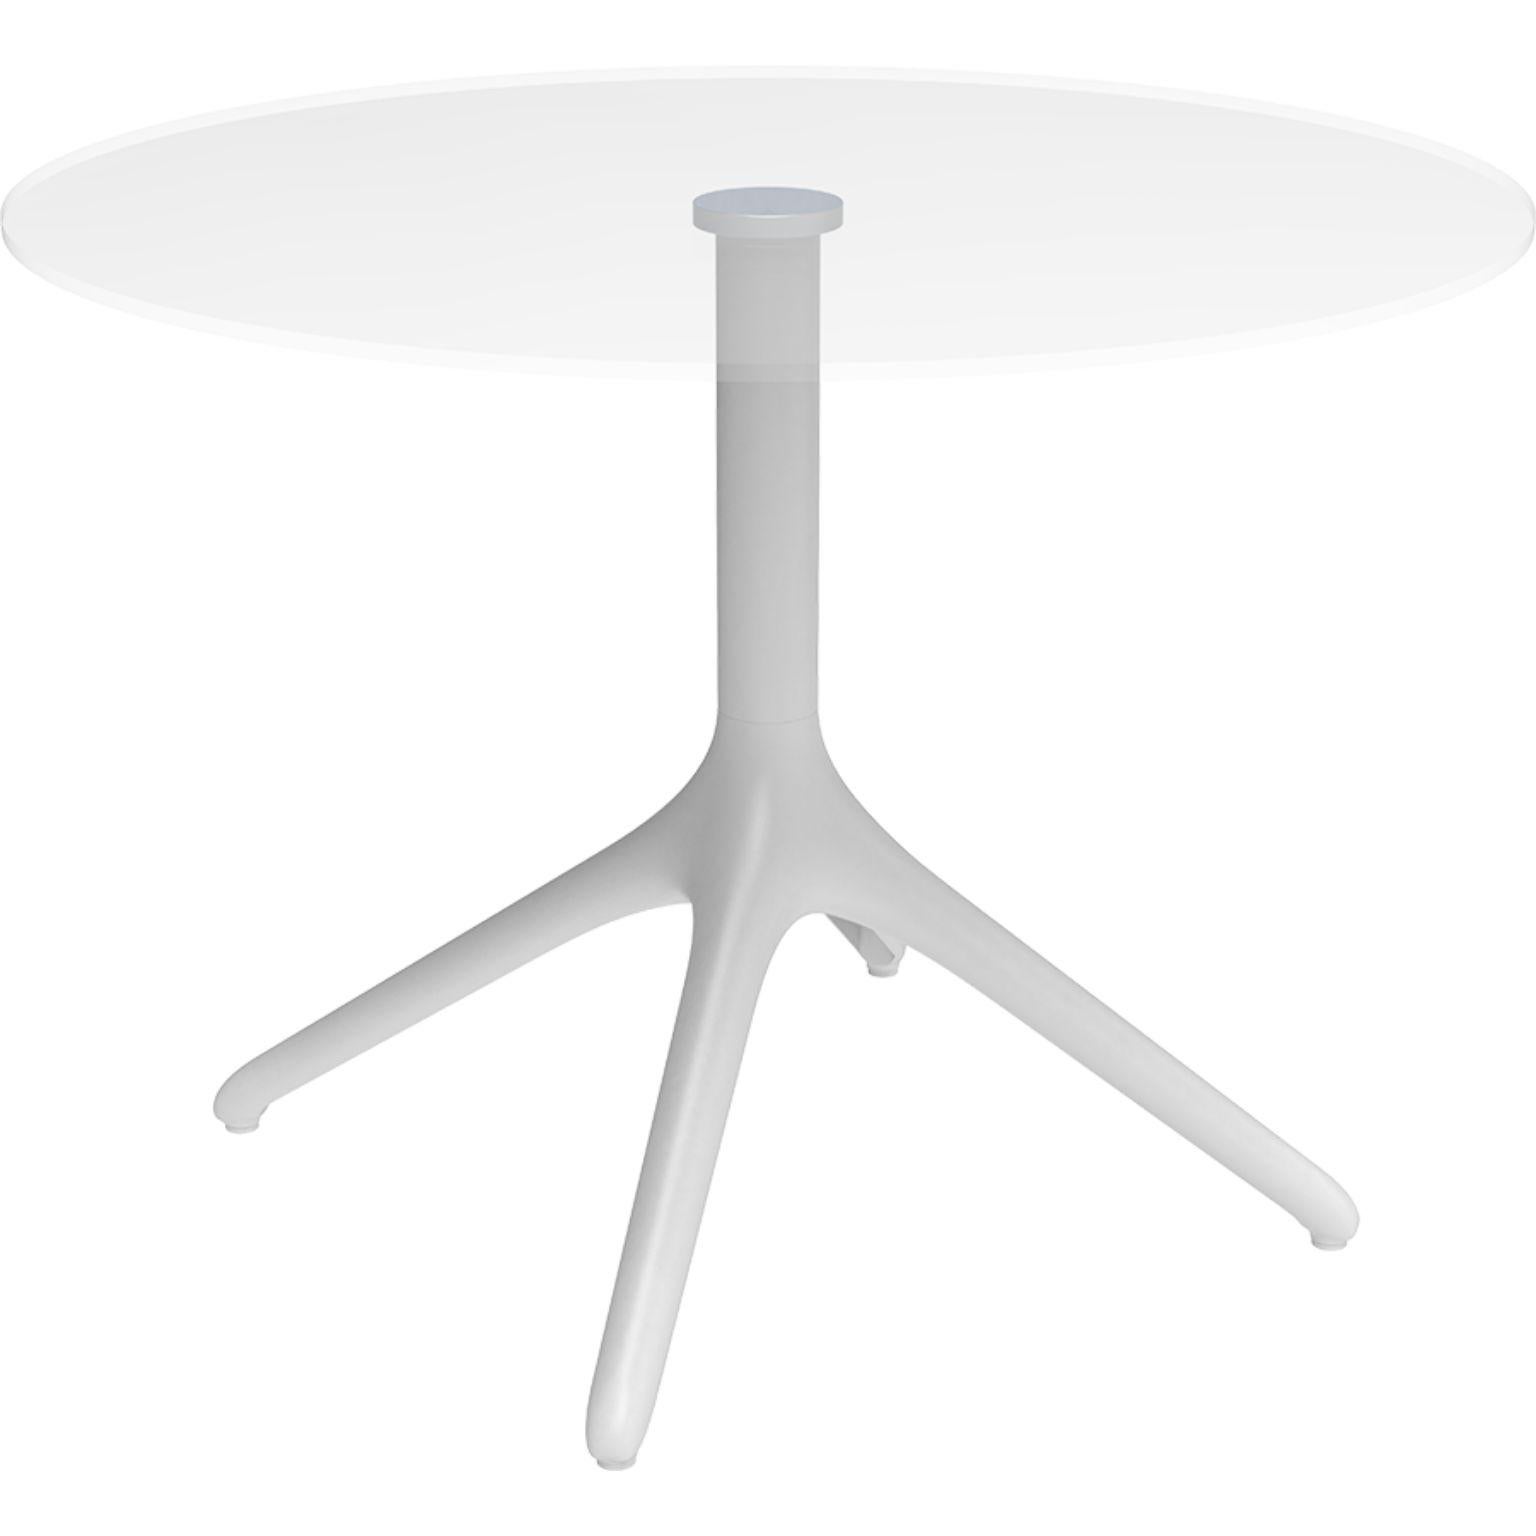 Aluminum Uni Burgundy Table XL 73 by MOWEE For Sale